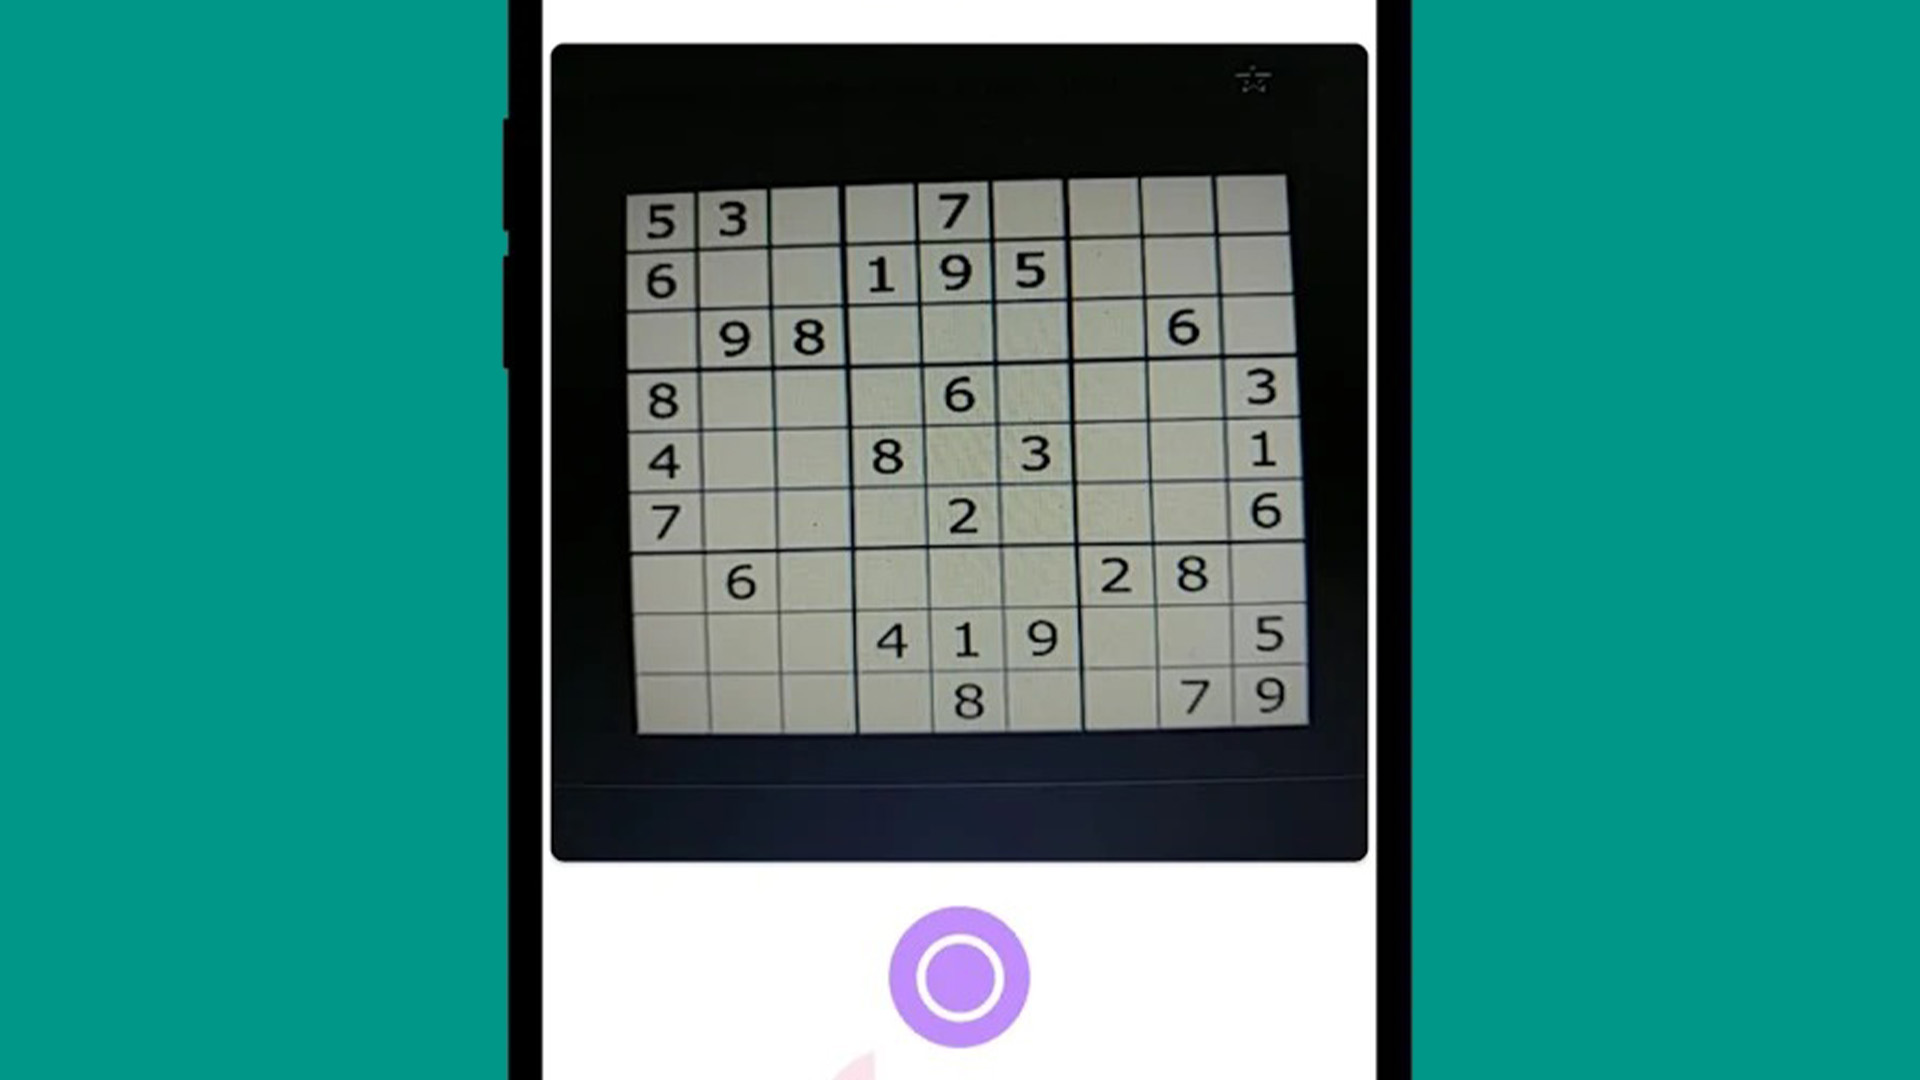 Snap Solve Sudoku best sudoku solvers for Android